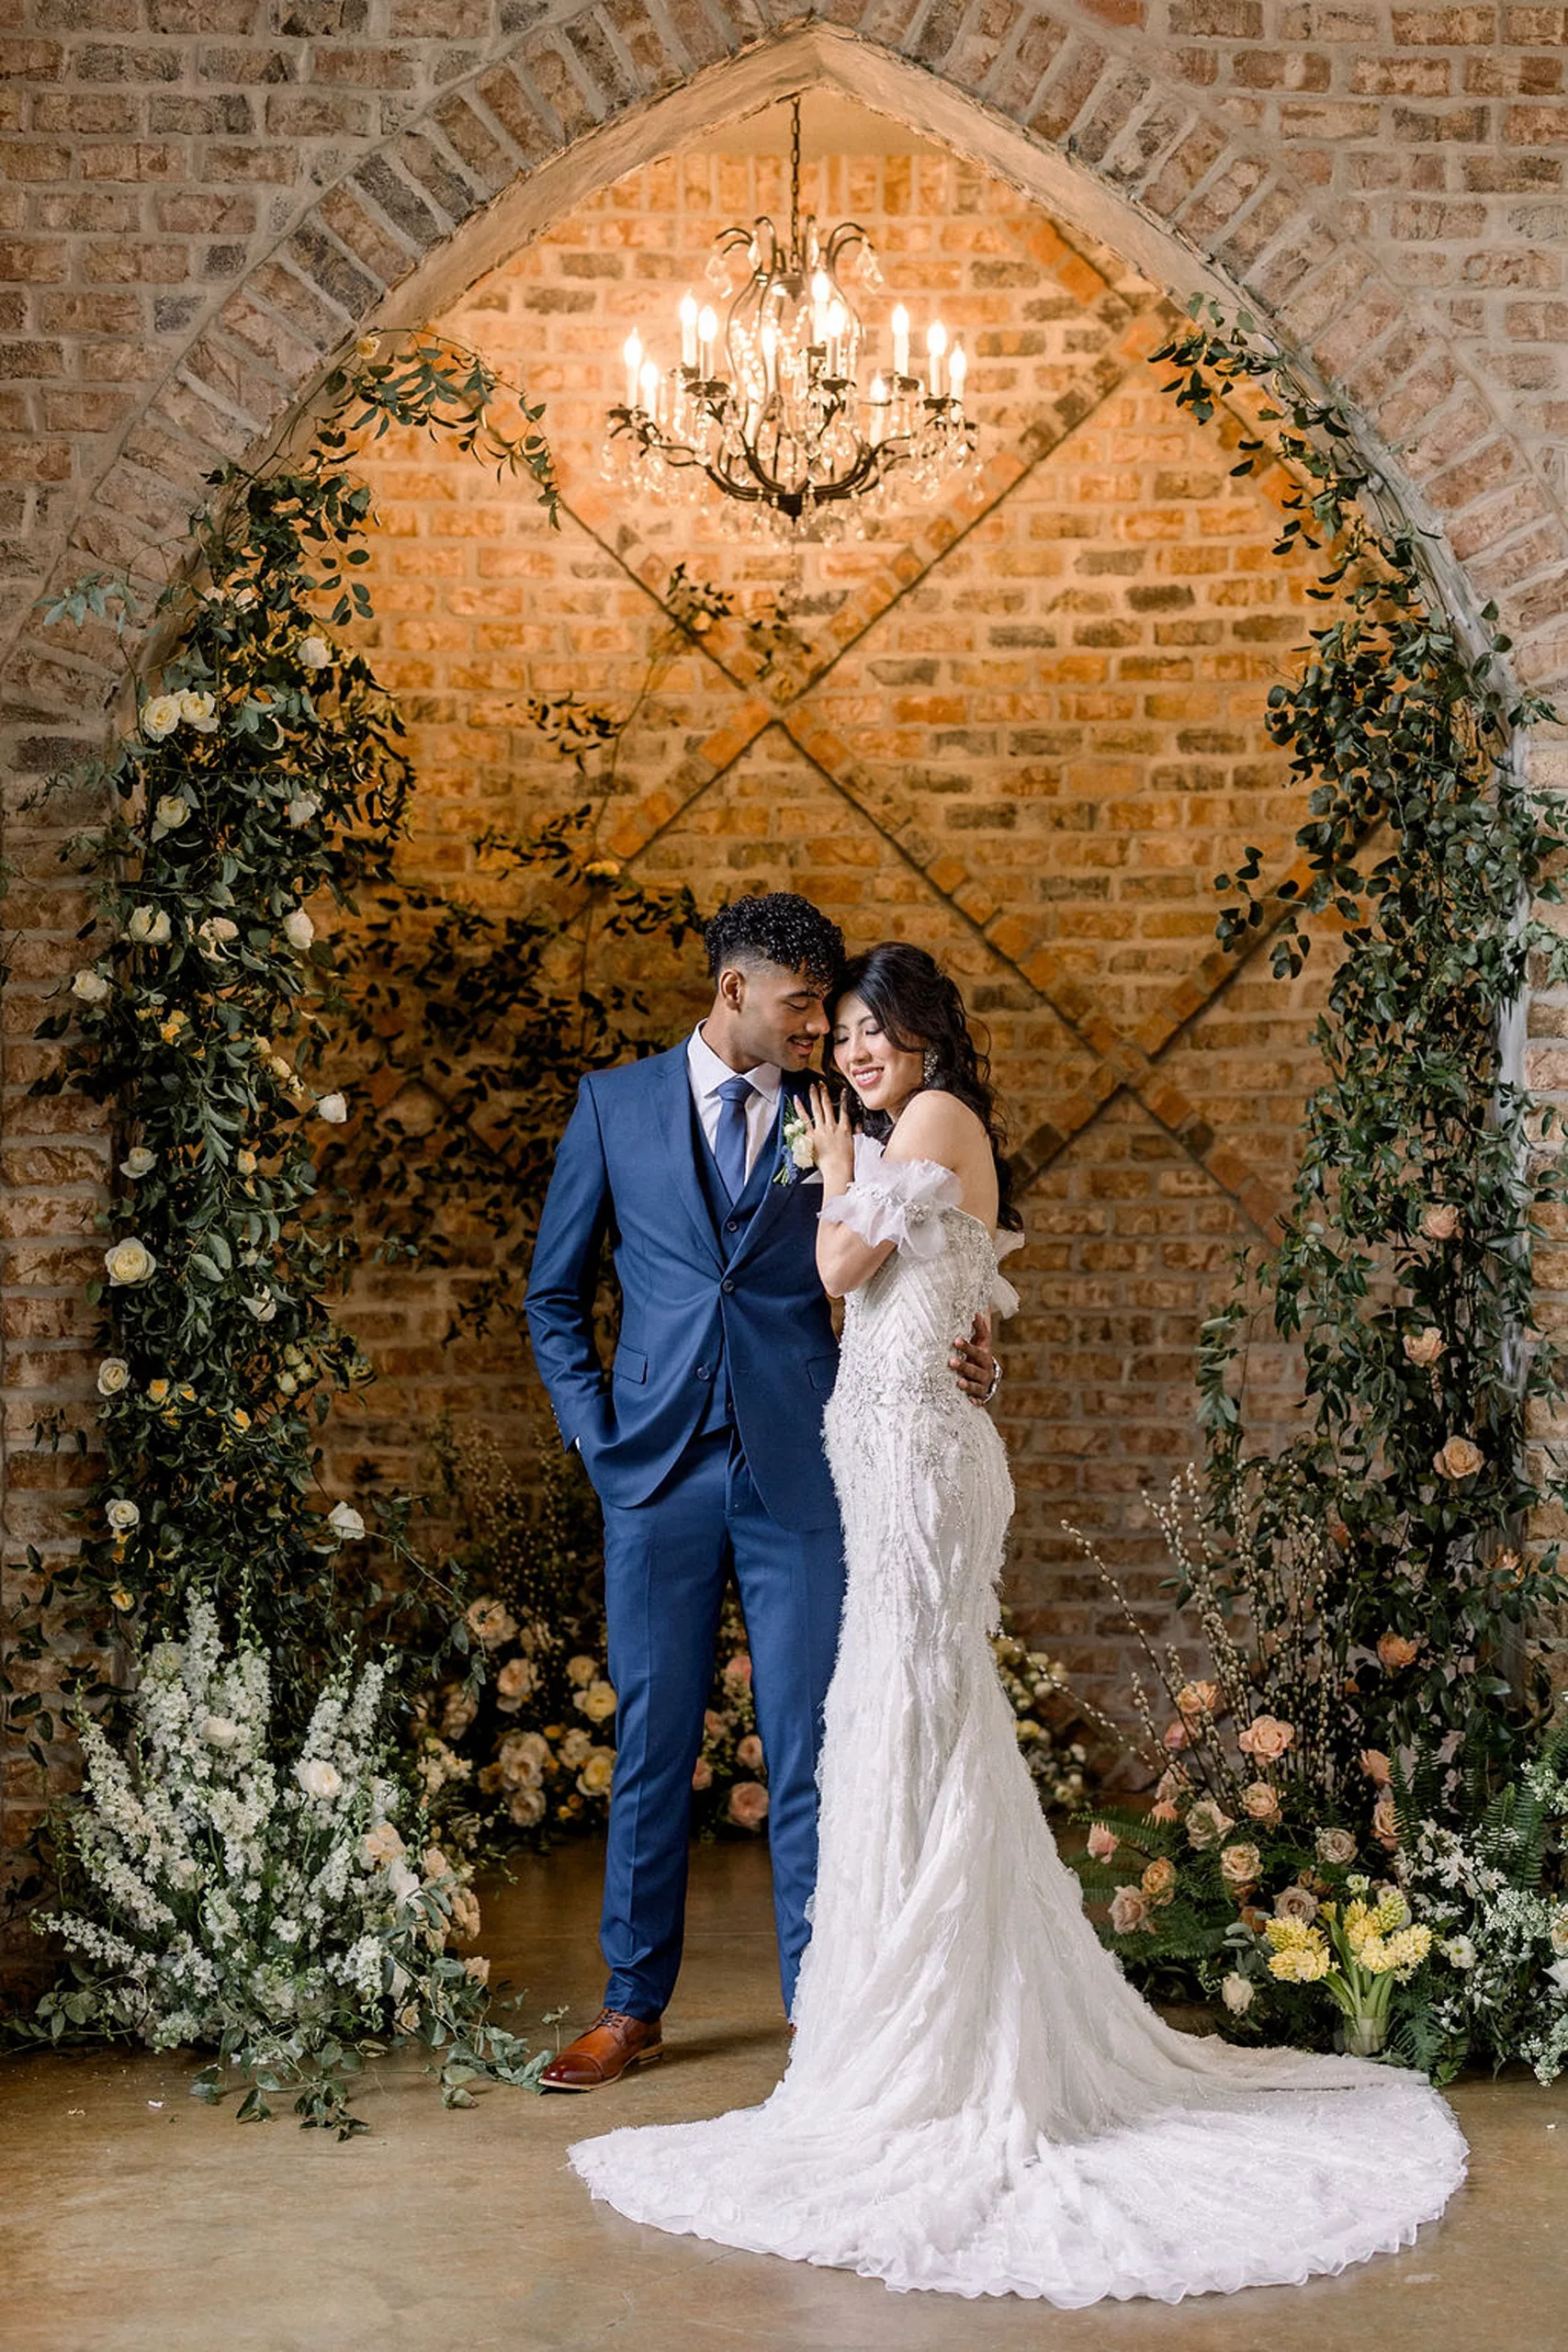 A groom stands under an arch decorated with lots of flowers holding his bride close under a chandelier